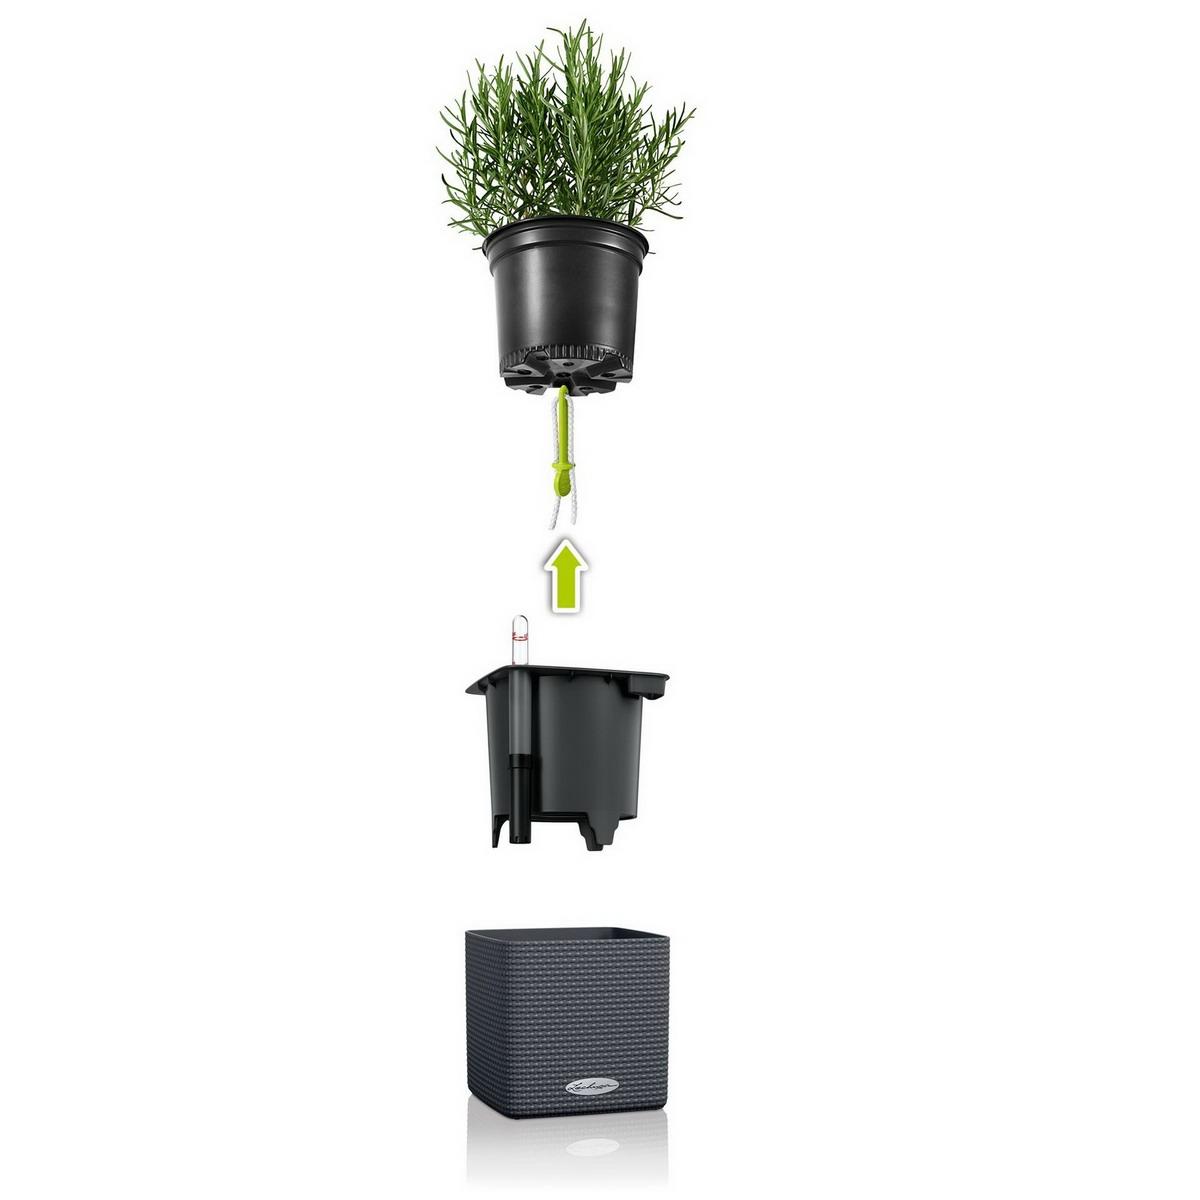 LECHUZA CUBE Color 14 Blackberry Poly Resin Table Self-watering Planter with Water Level Indicator H14 L14 W14 cm, 1.4L - citiplants.com